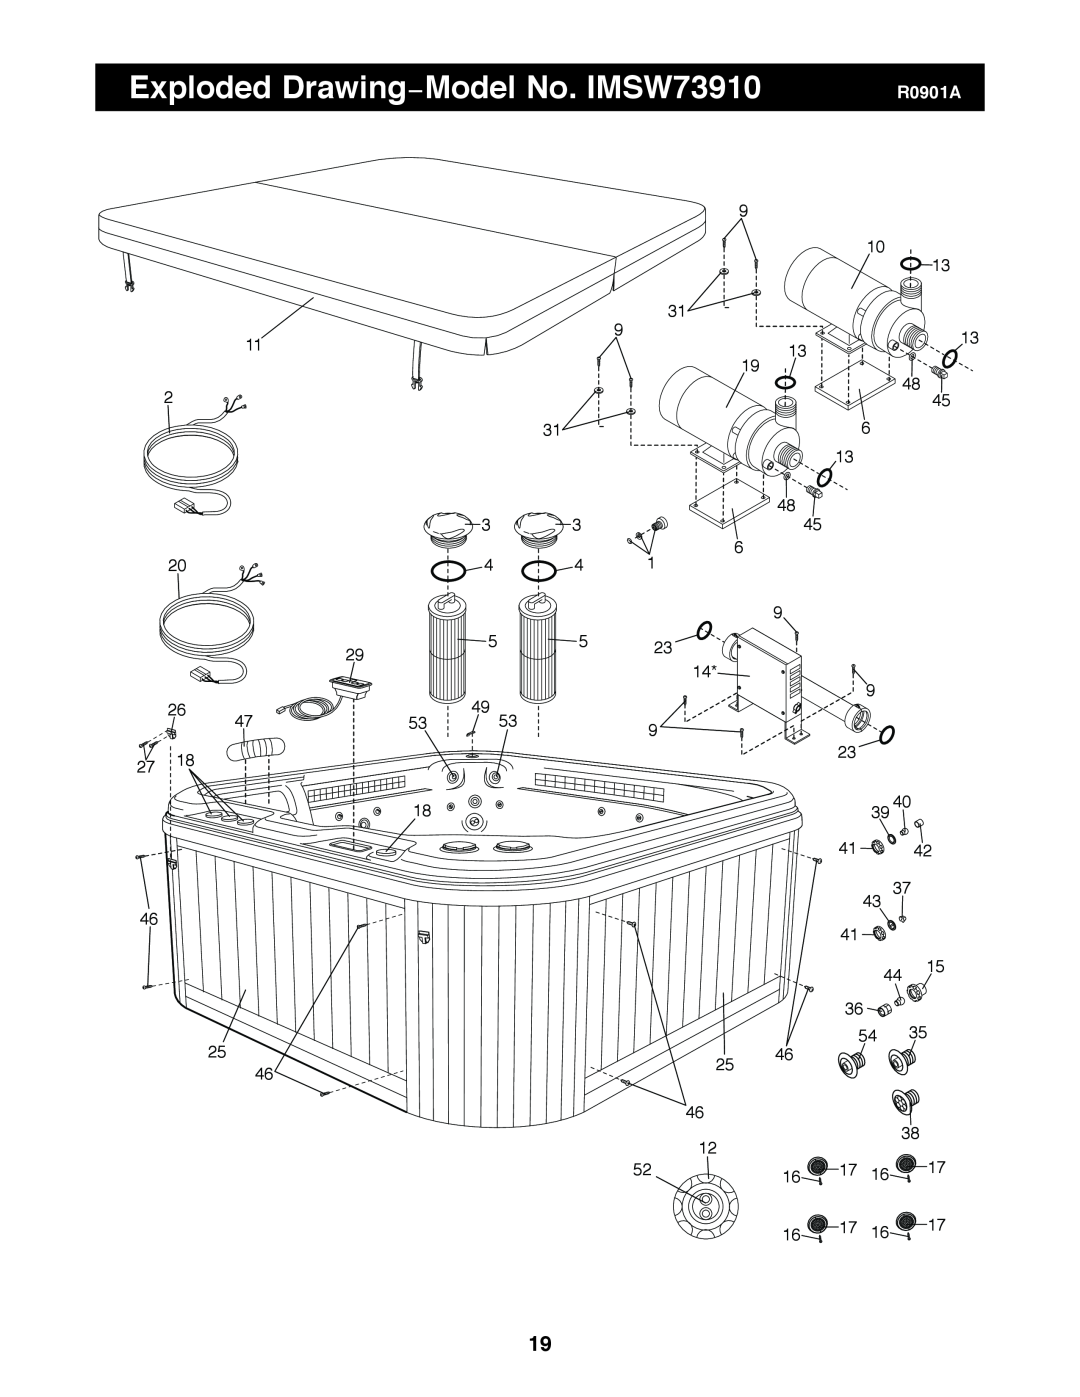 Image user manual Exploded Drawing Model No. IMSW73910, R0901A 